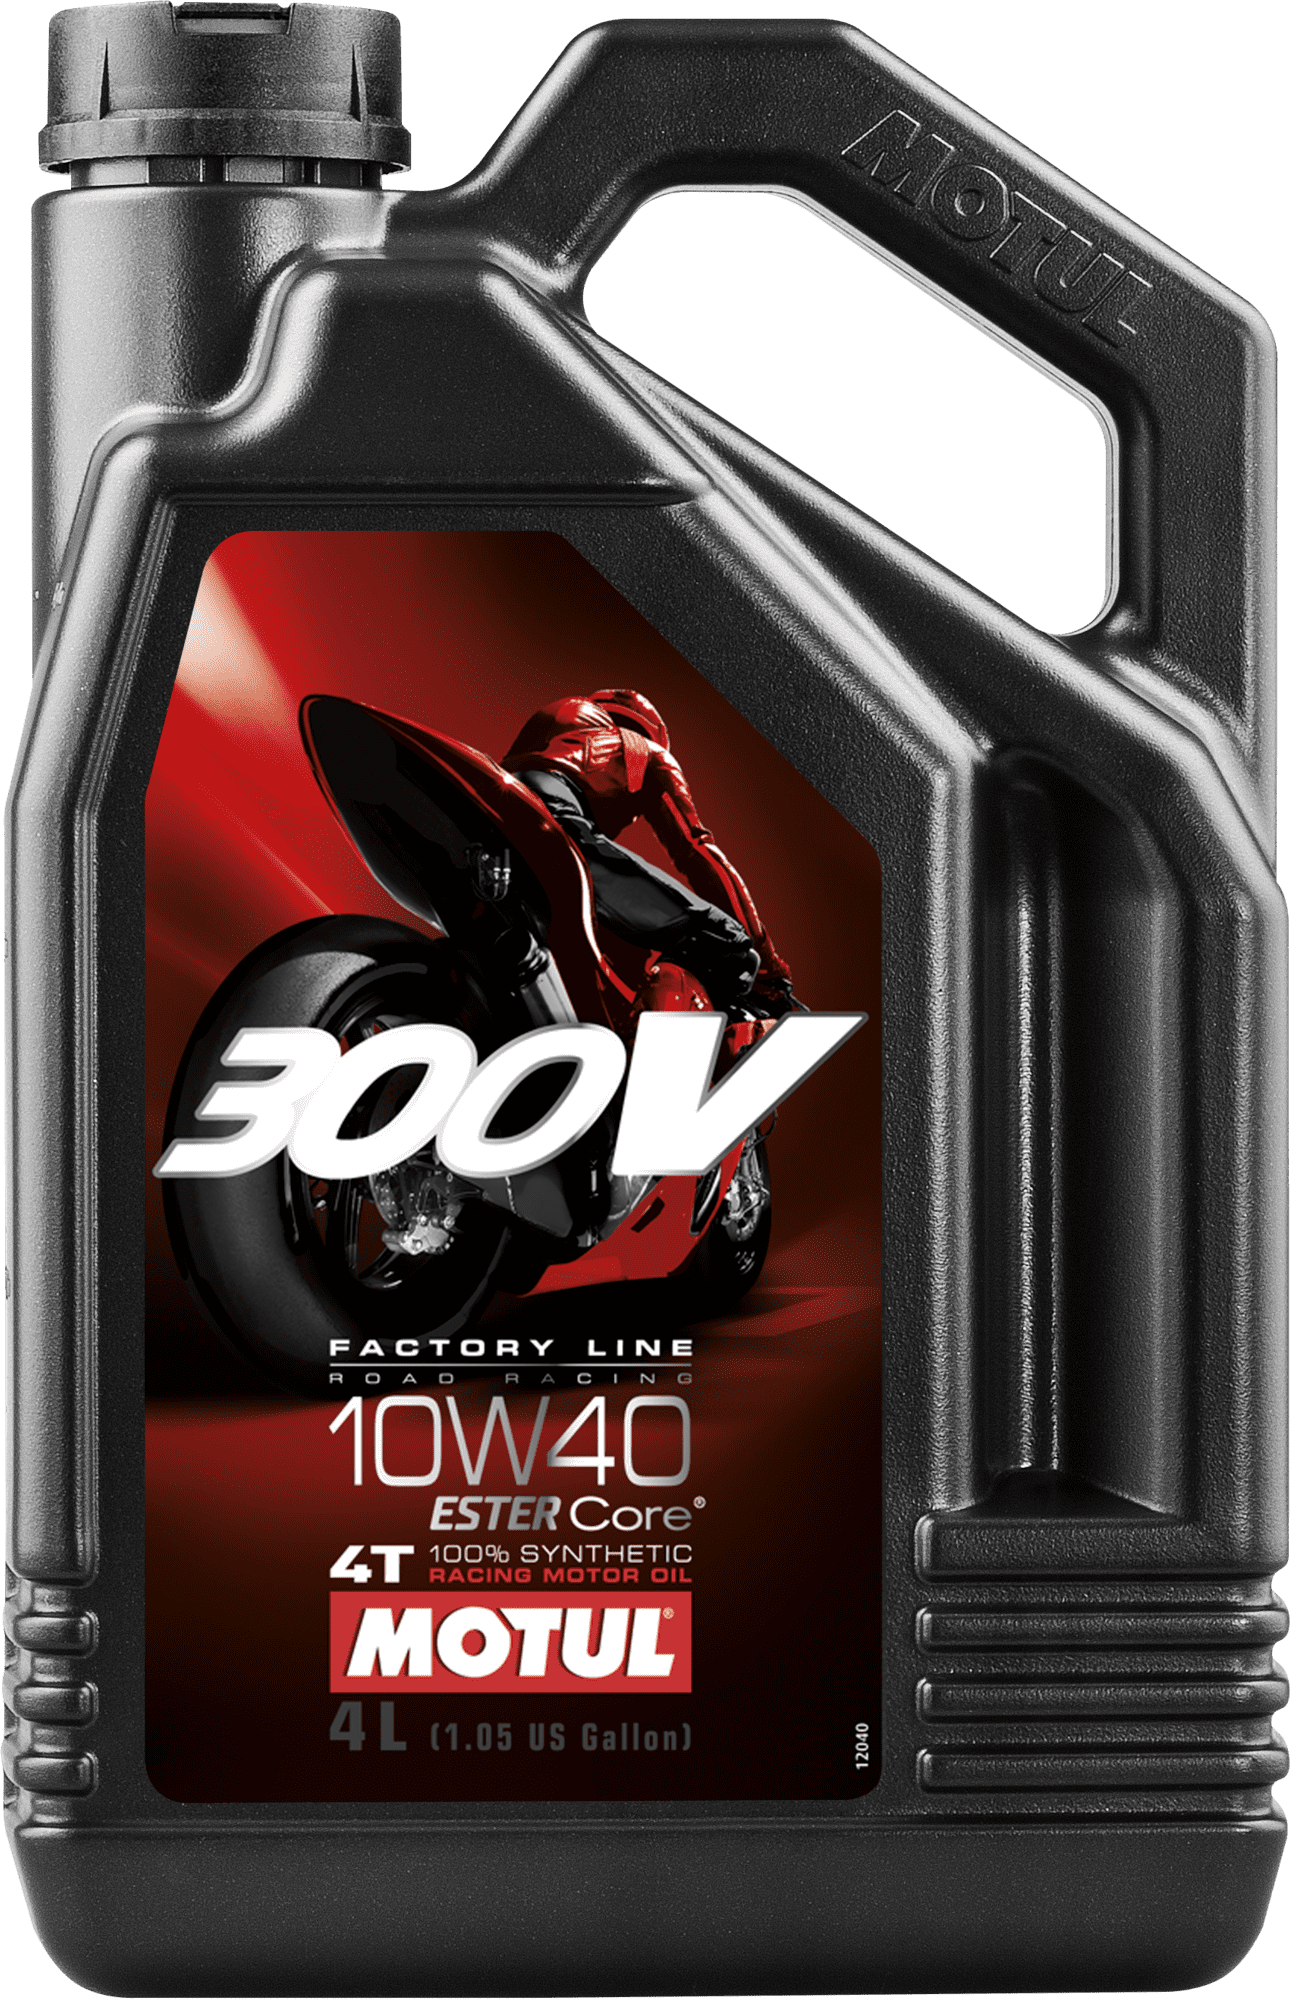 104121-4 100% Synthetic racing motor oil. Based on ESTER Core® technology and above all existing motorsport standards.